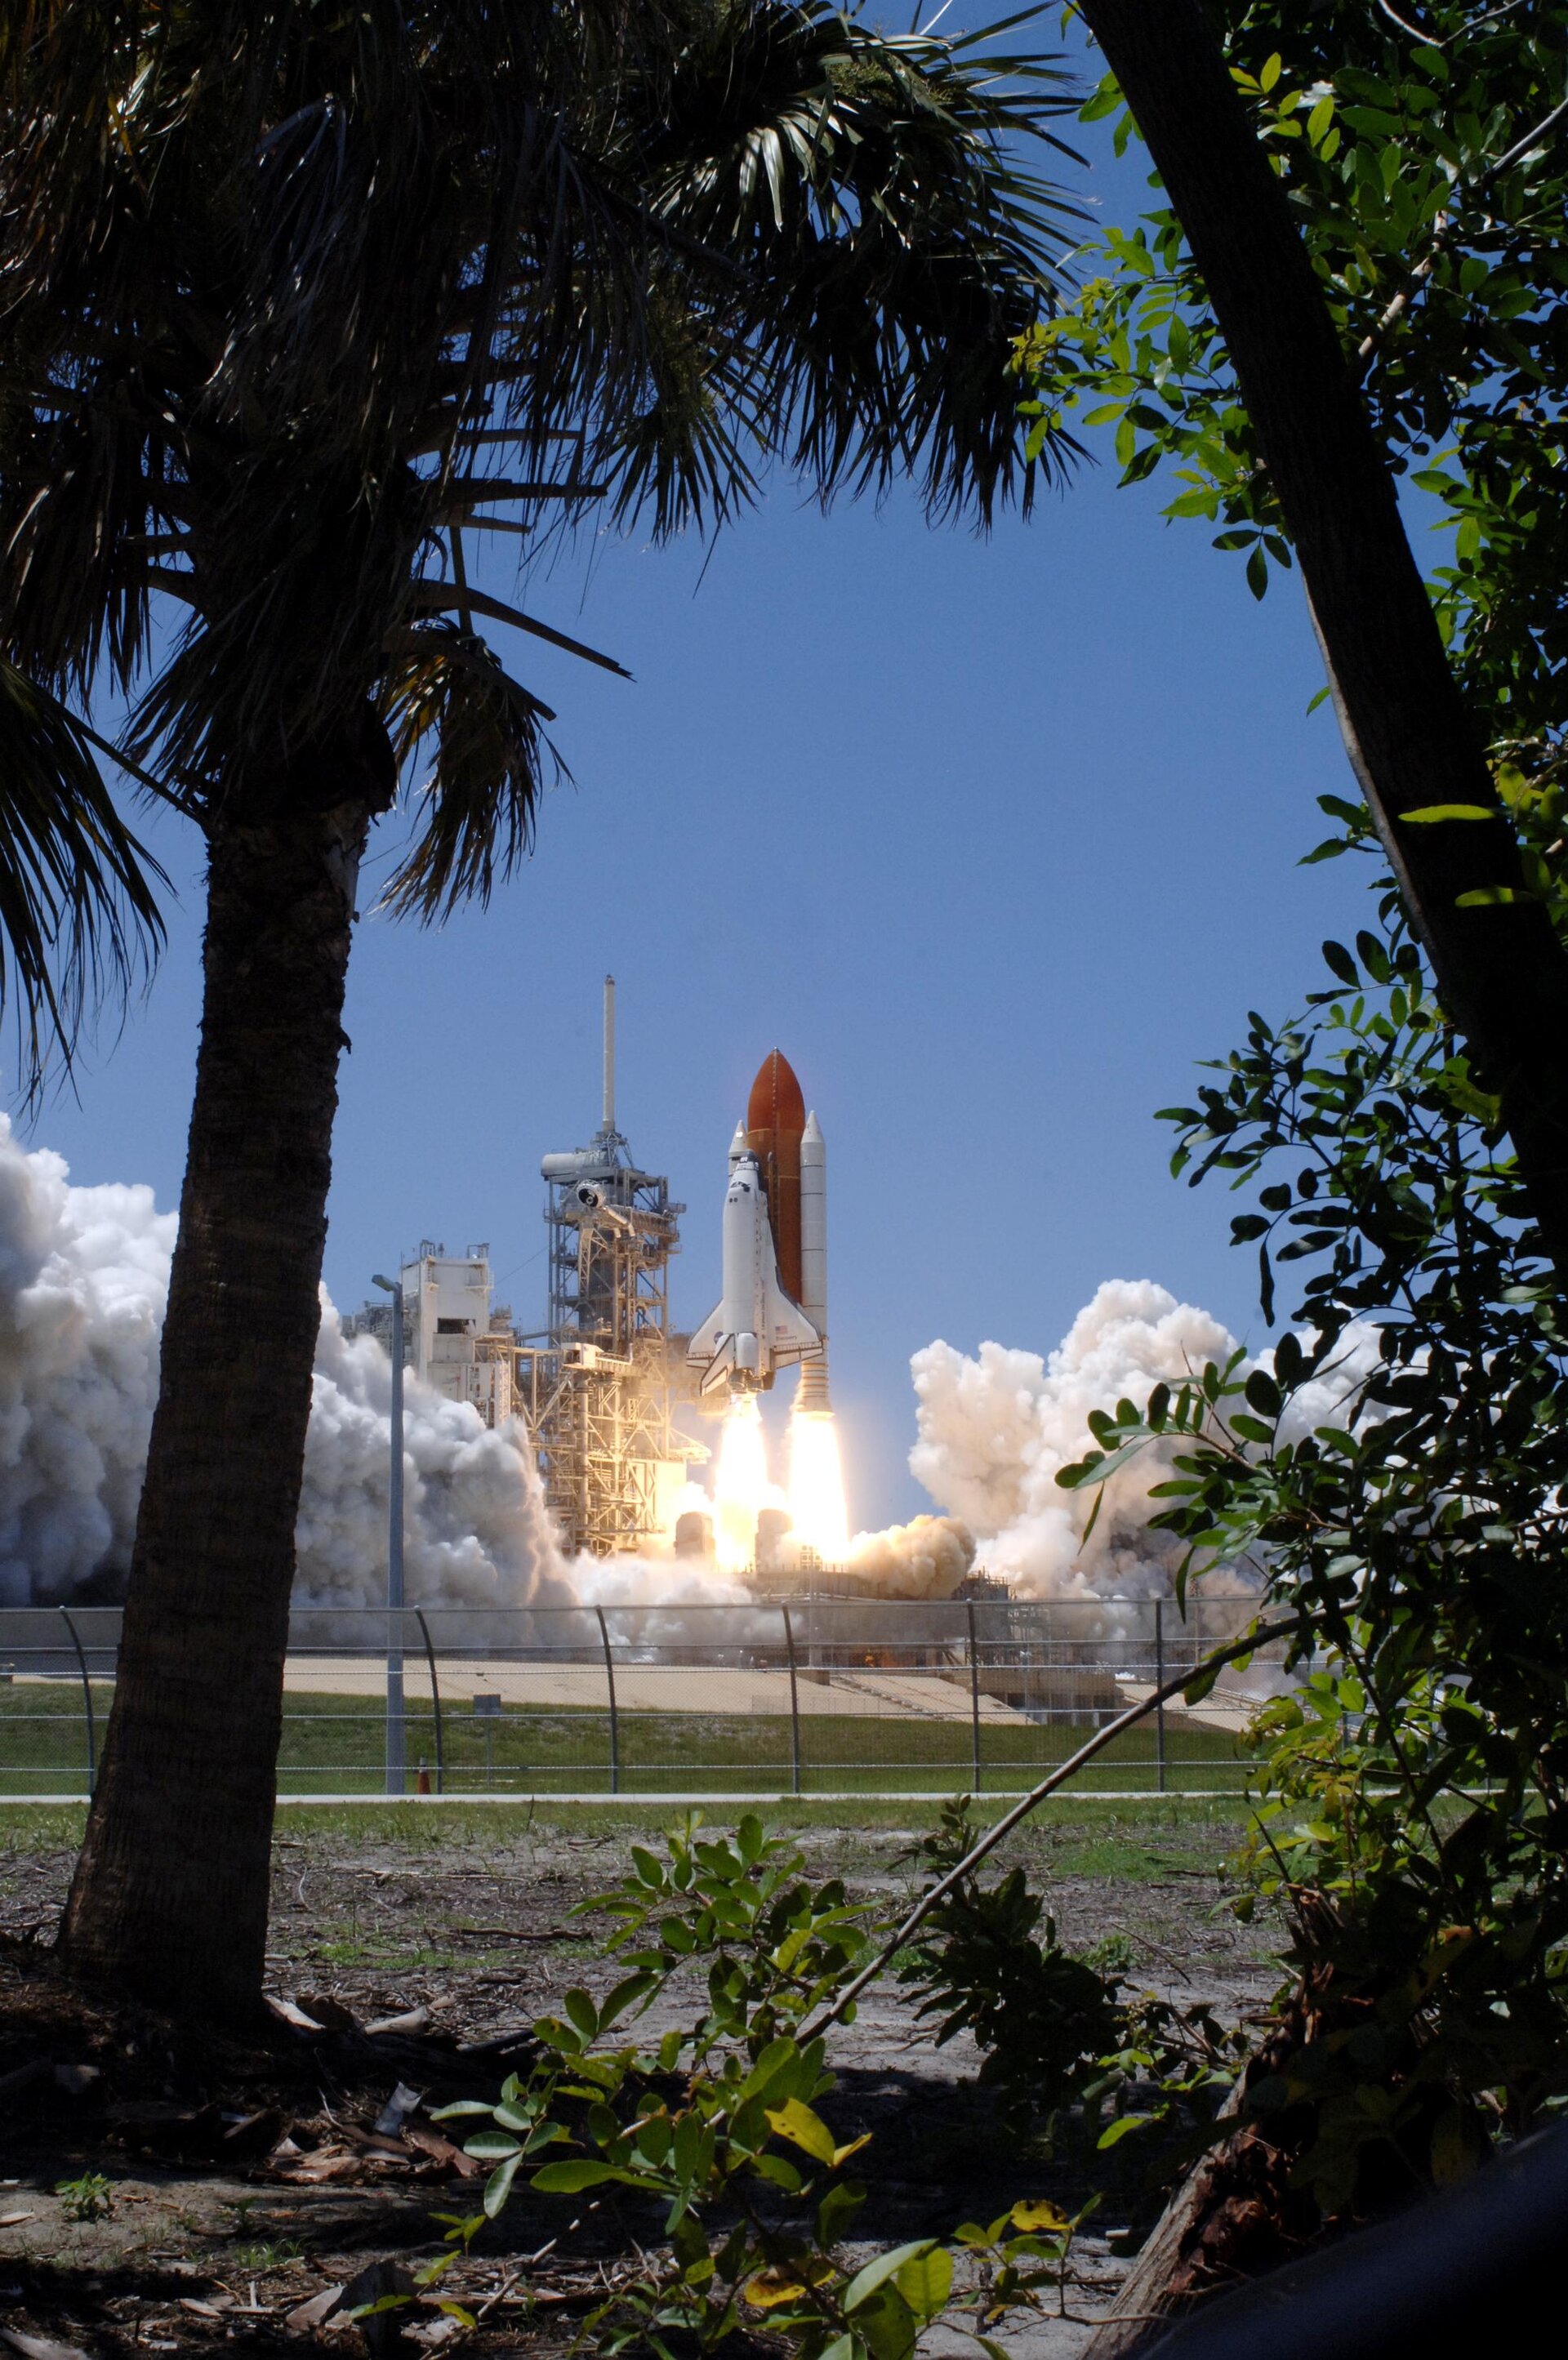 Space Shuttle Discovery lifts off